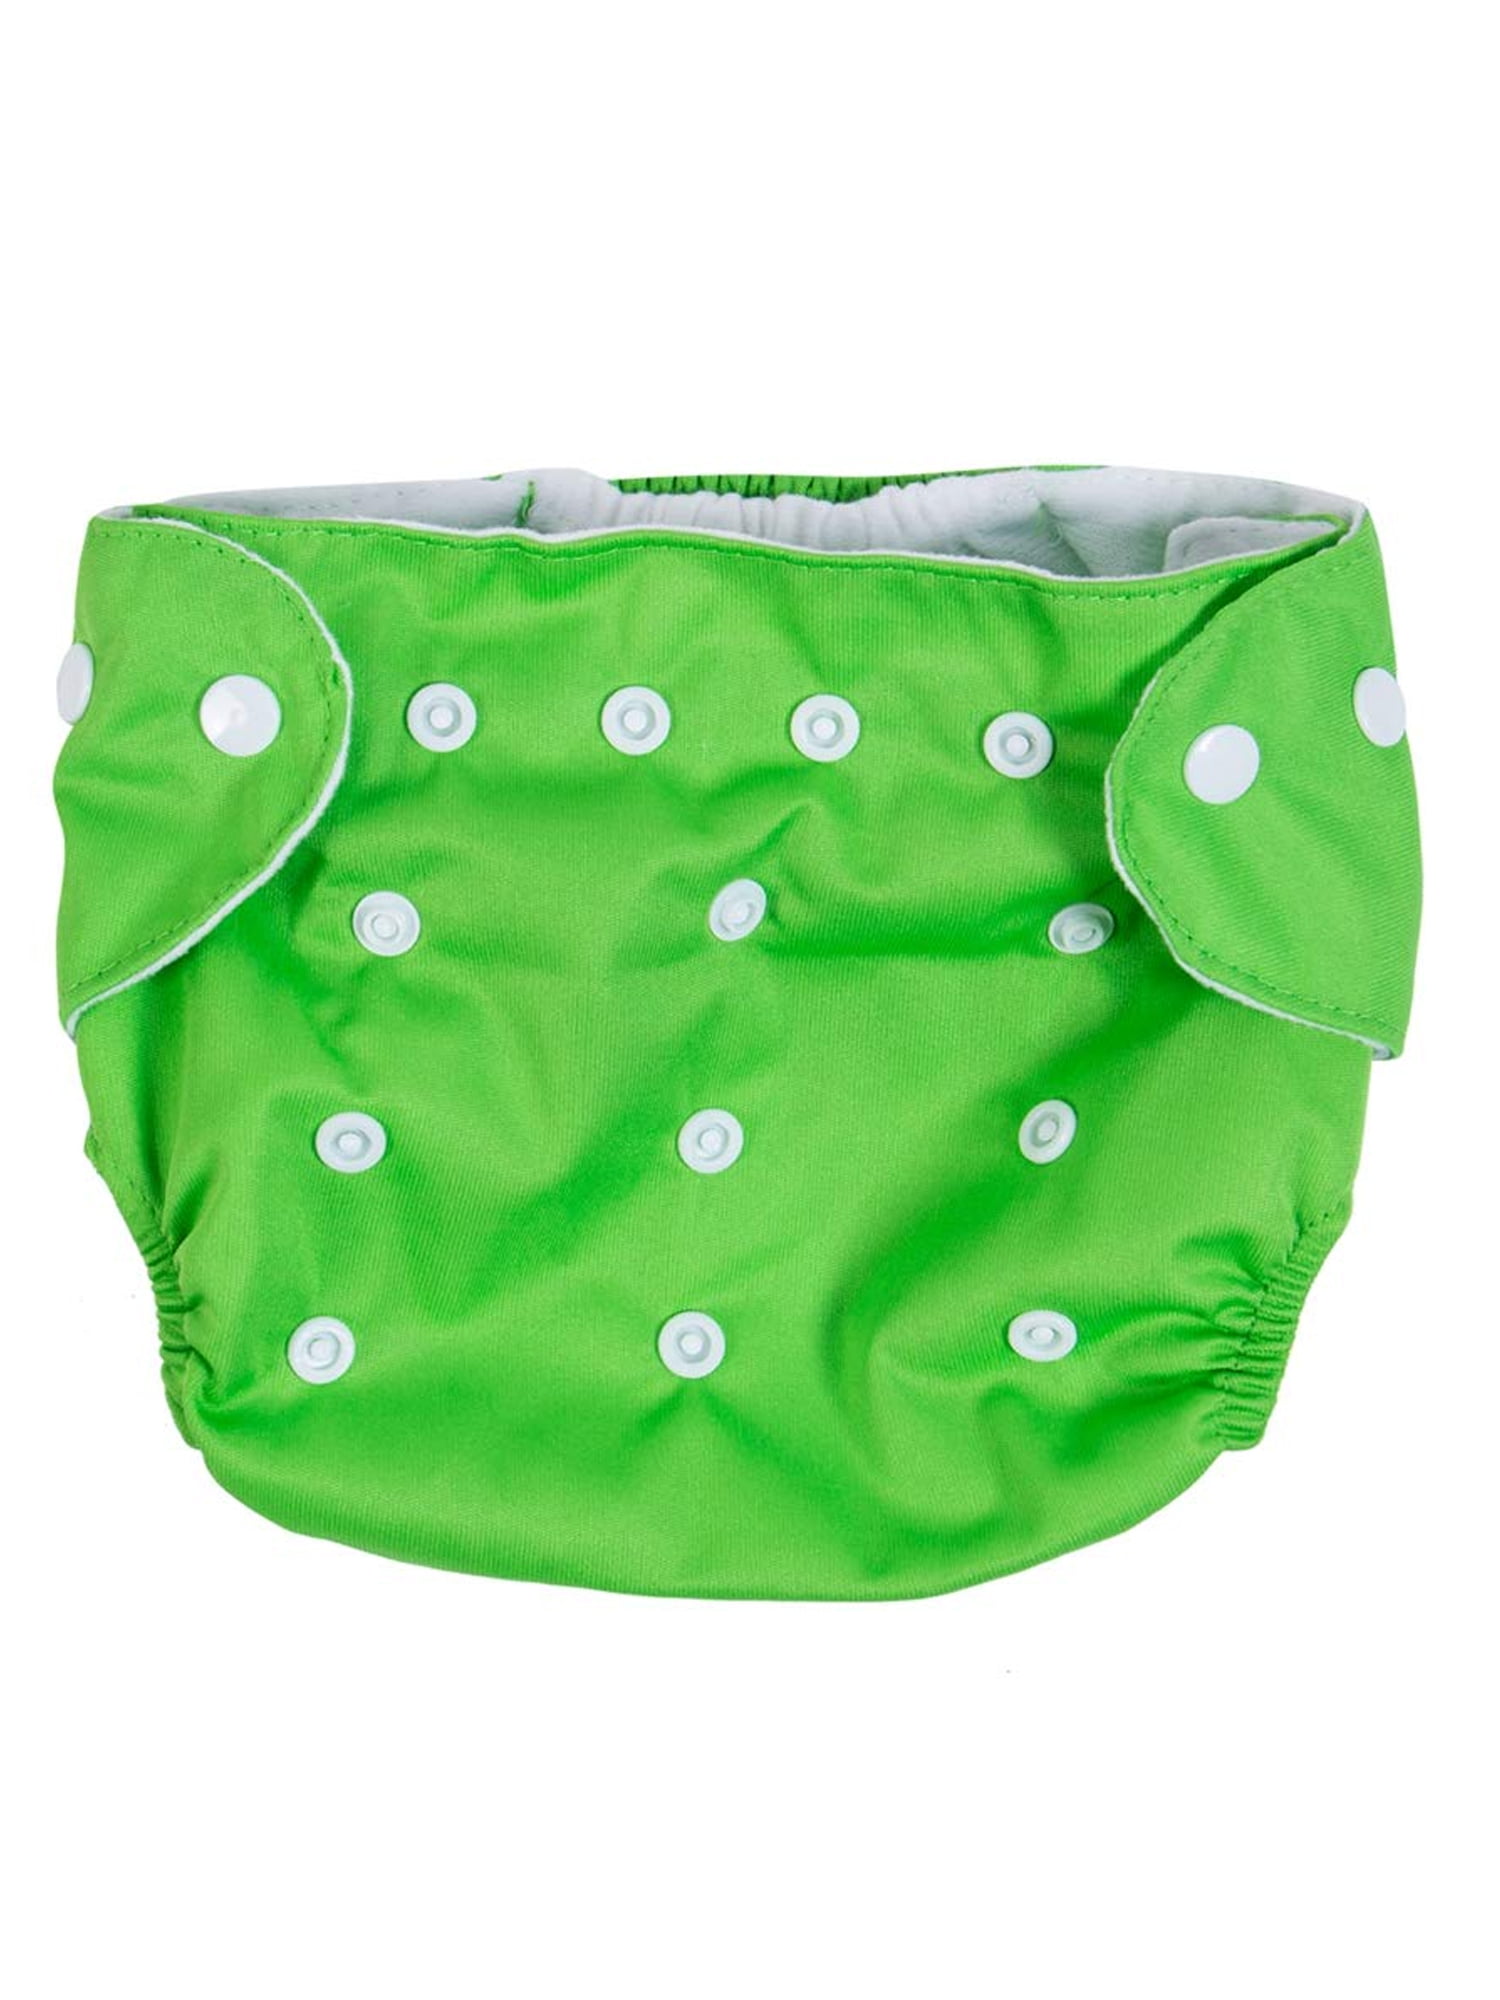 Washable Baby Pocket Nappy Cloth Cover Adjustable Reusable Infant Kids Diaper 